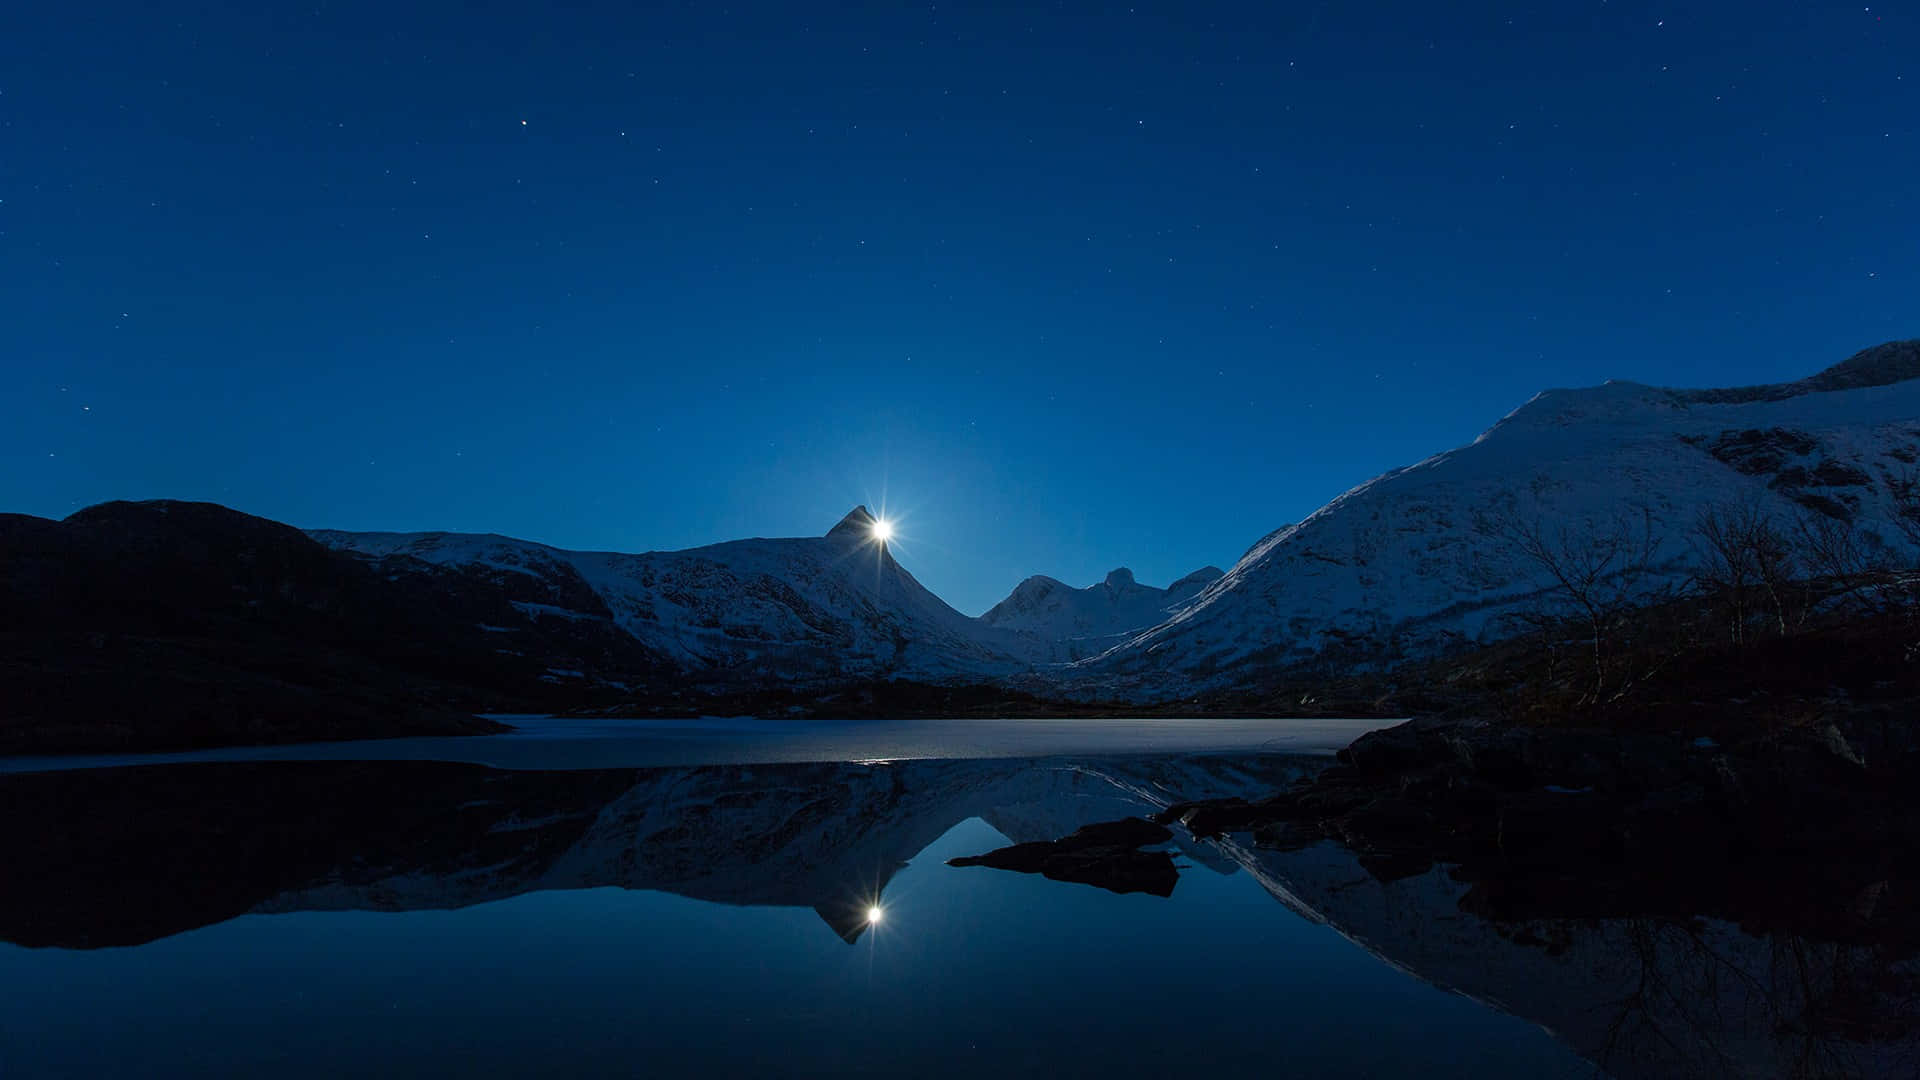 A Full Moon Is Seen Over A Lake At Night